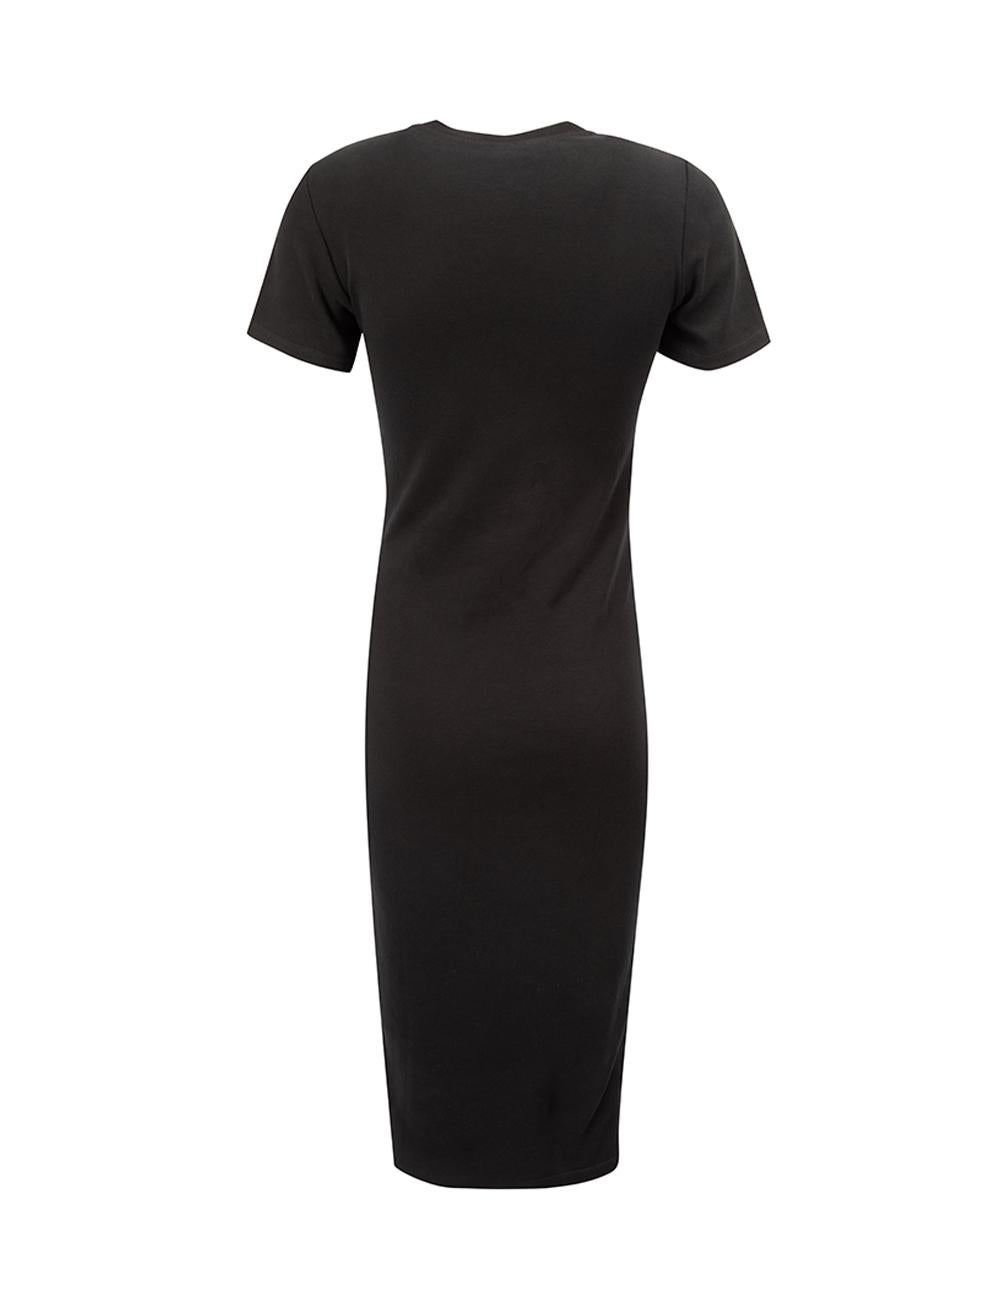 Proenza Schouler Women's Black Buttoned Waist Knee Length Dress In Good Condition For Sale In London, GB